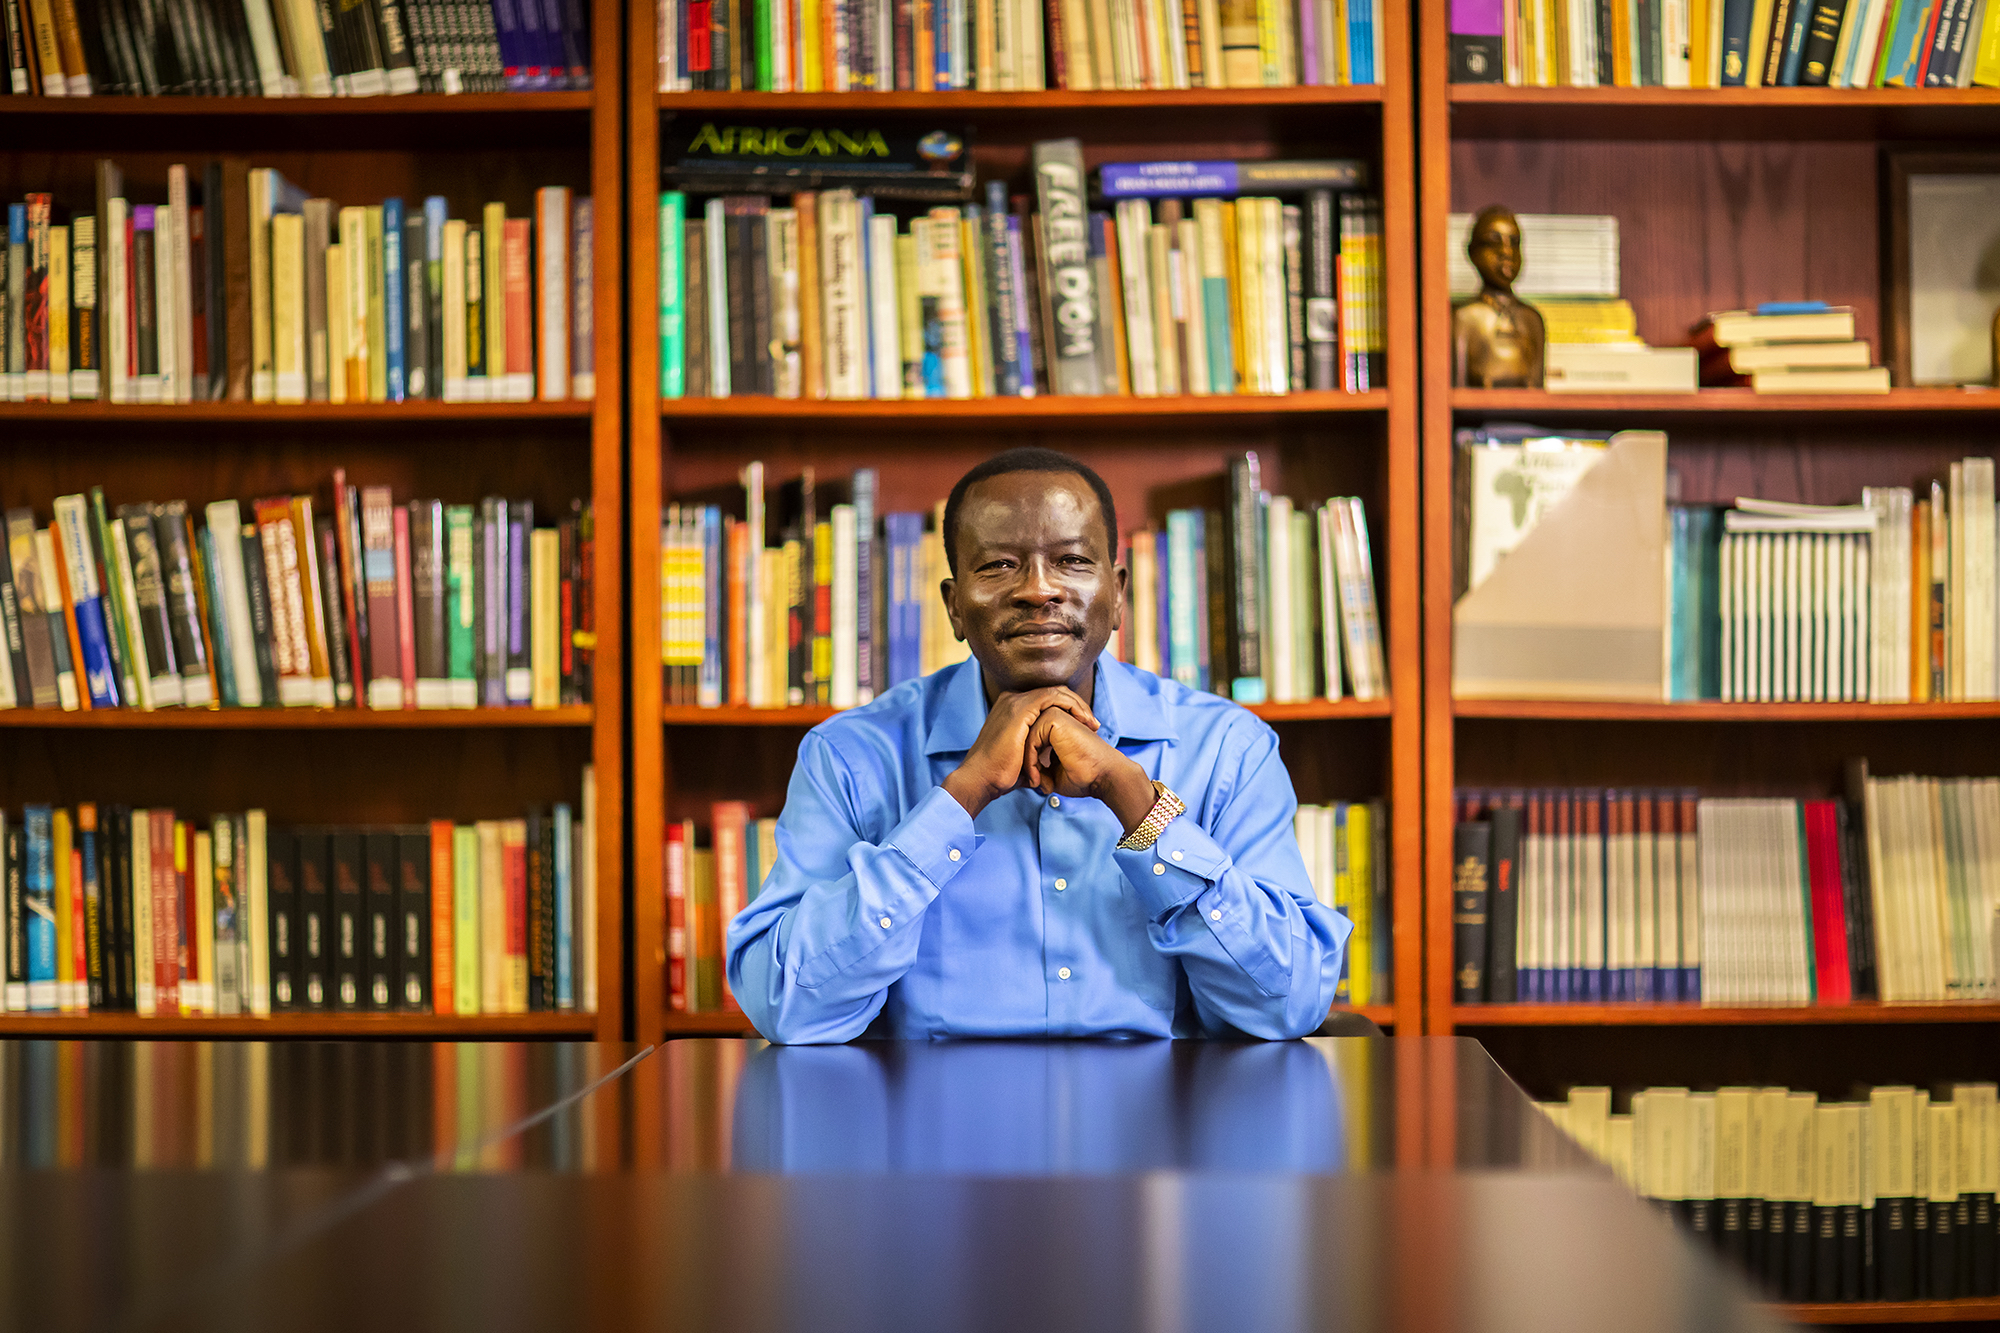 Sudanese scholar and Penn lecturer Ali Ali-Dinar sits at table with his elbows on the table, clasping his fists under his chin, in front of a large bookcase.